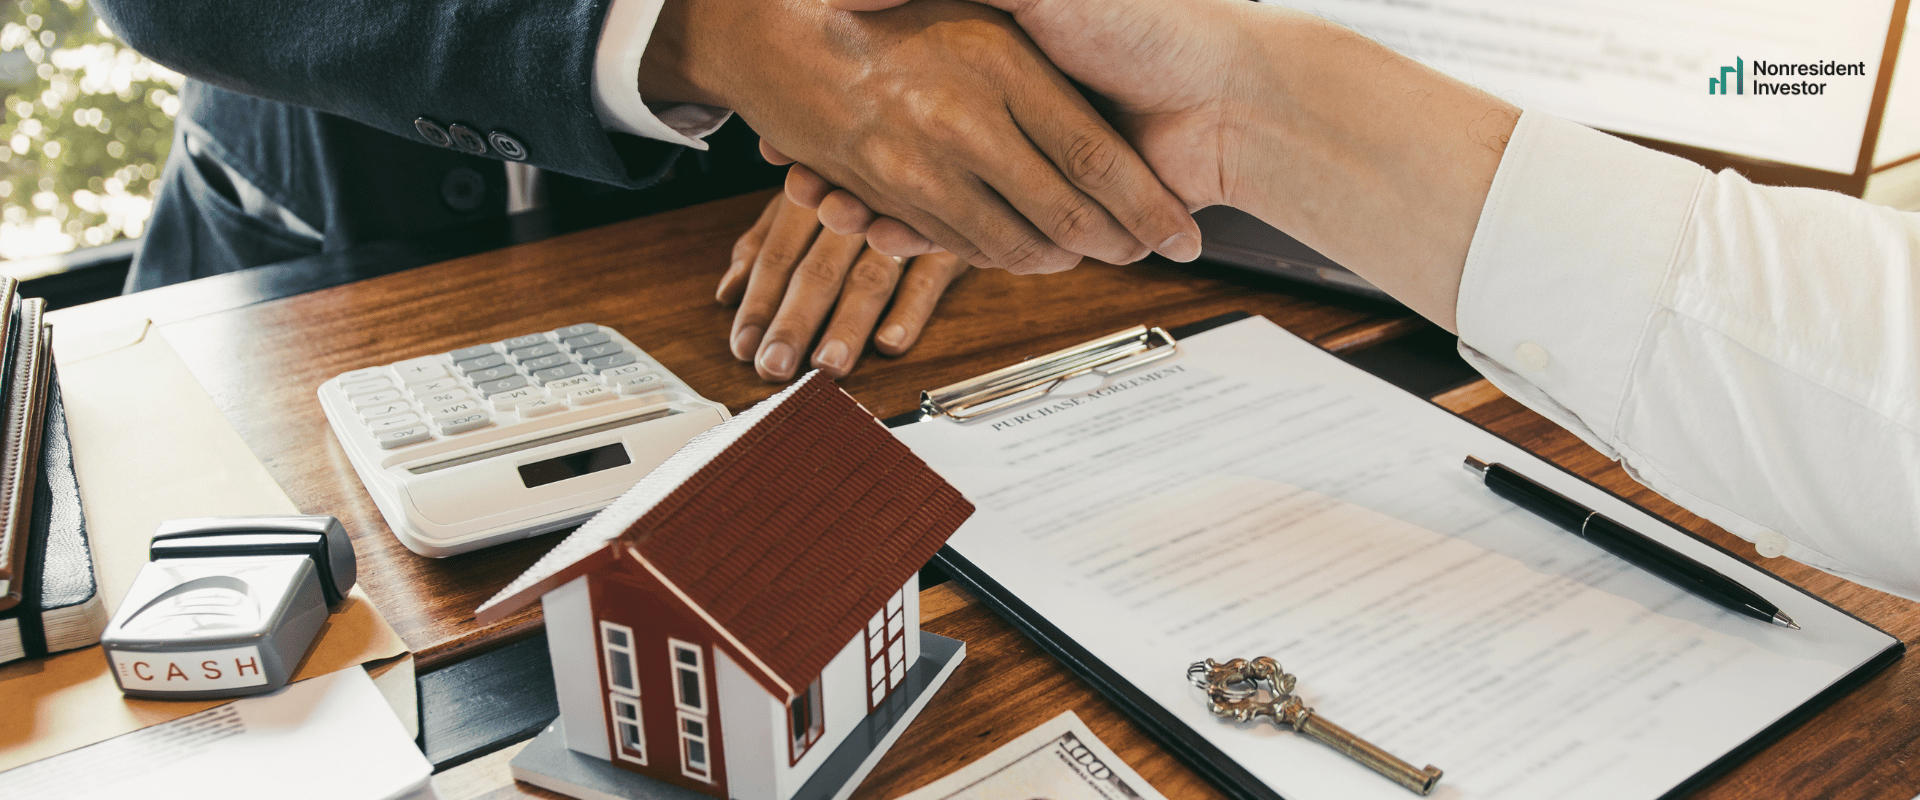 a registered agent and foreigner investor shaking hands after opening a us llc for a nonresident investor